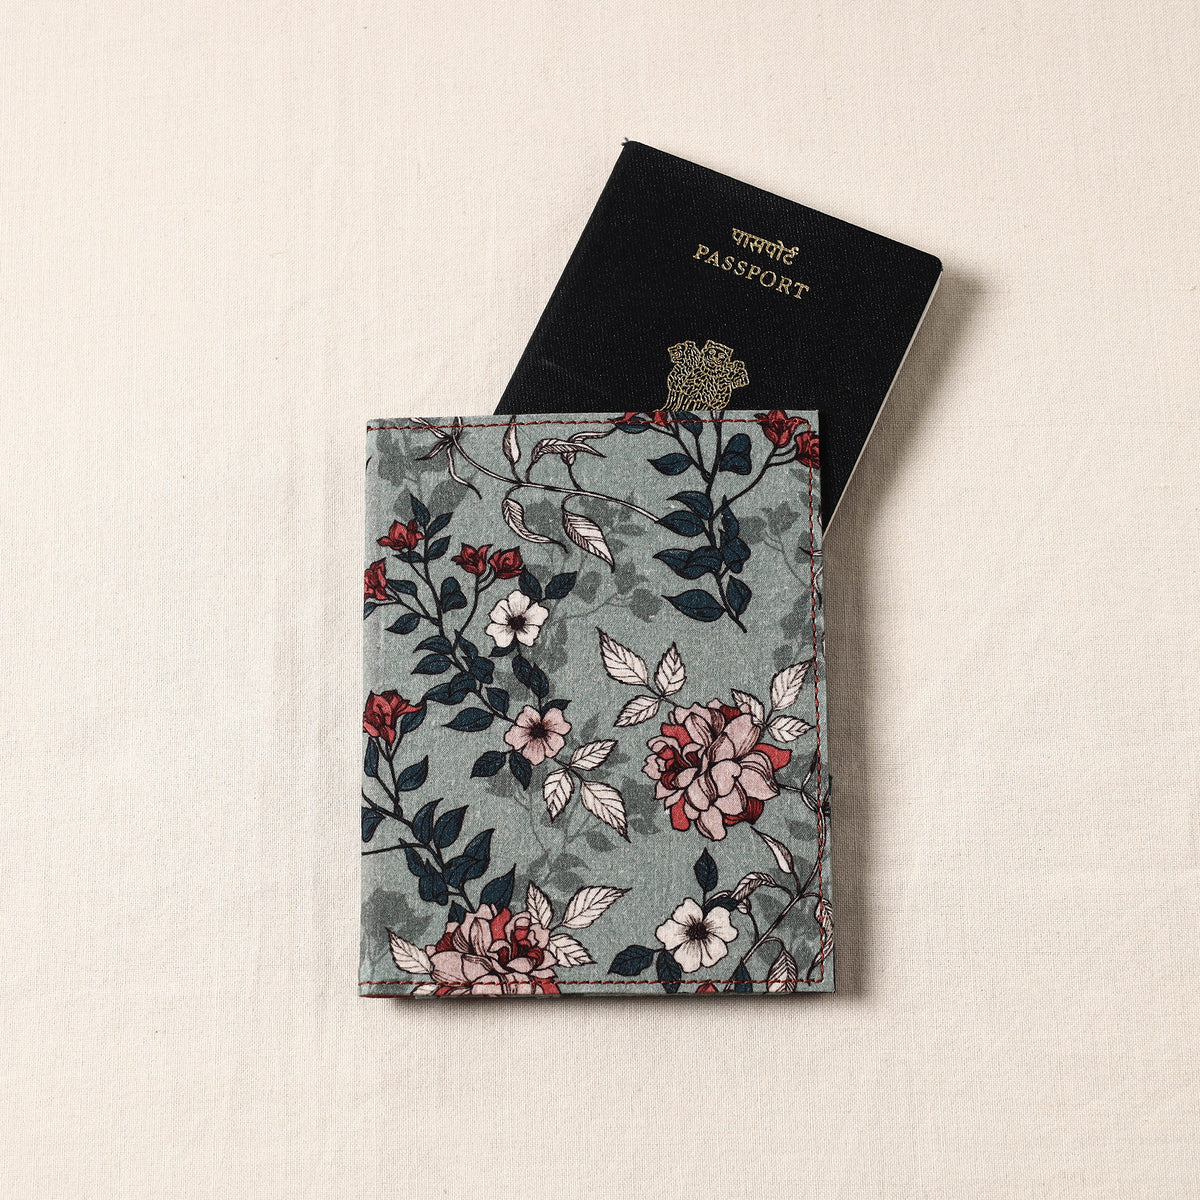 Floral Printed Handcrafted Leather Passport Holder